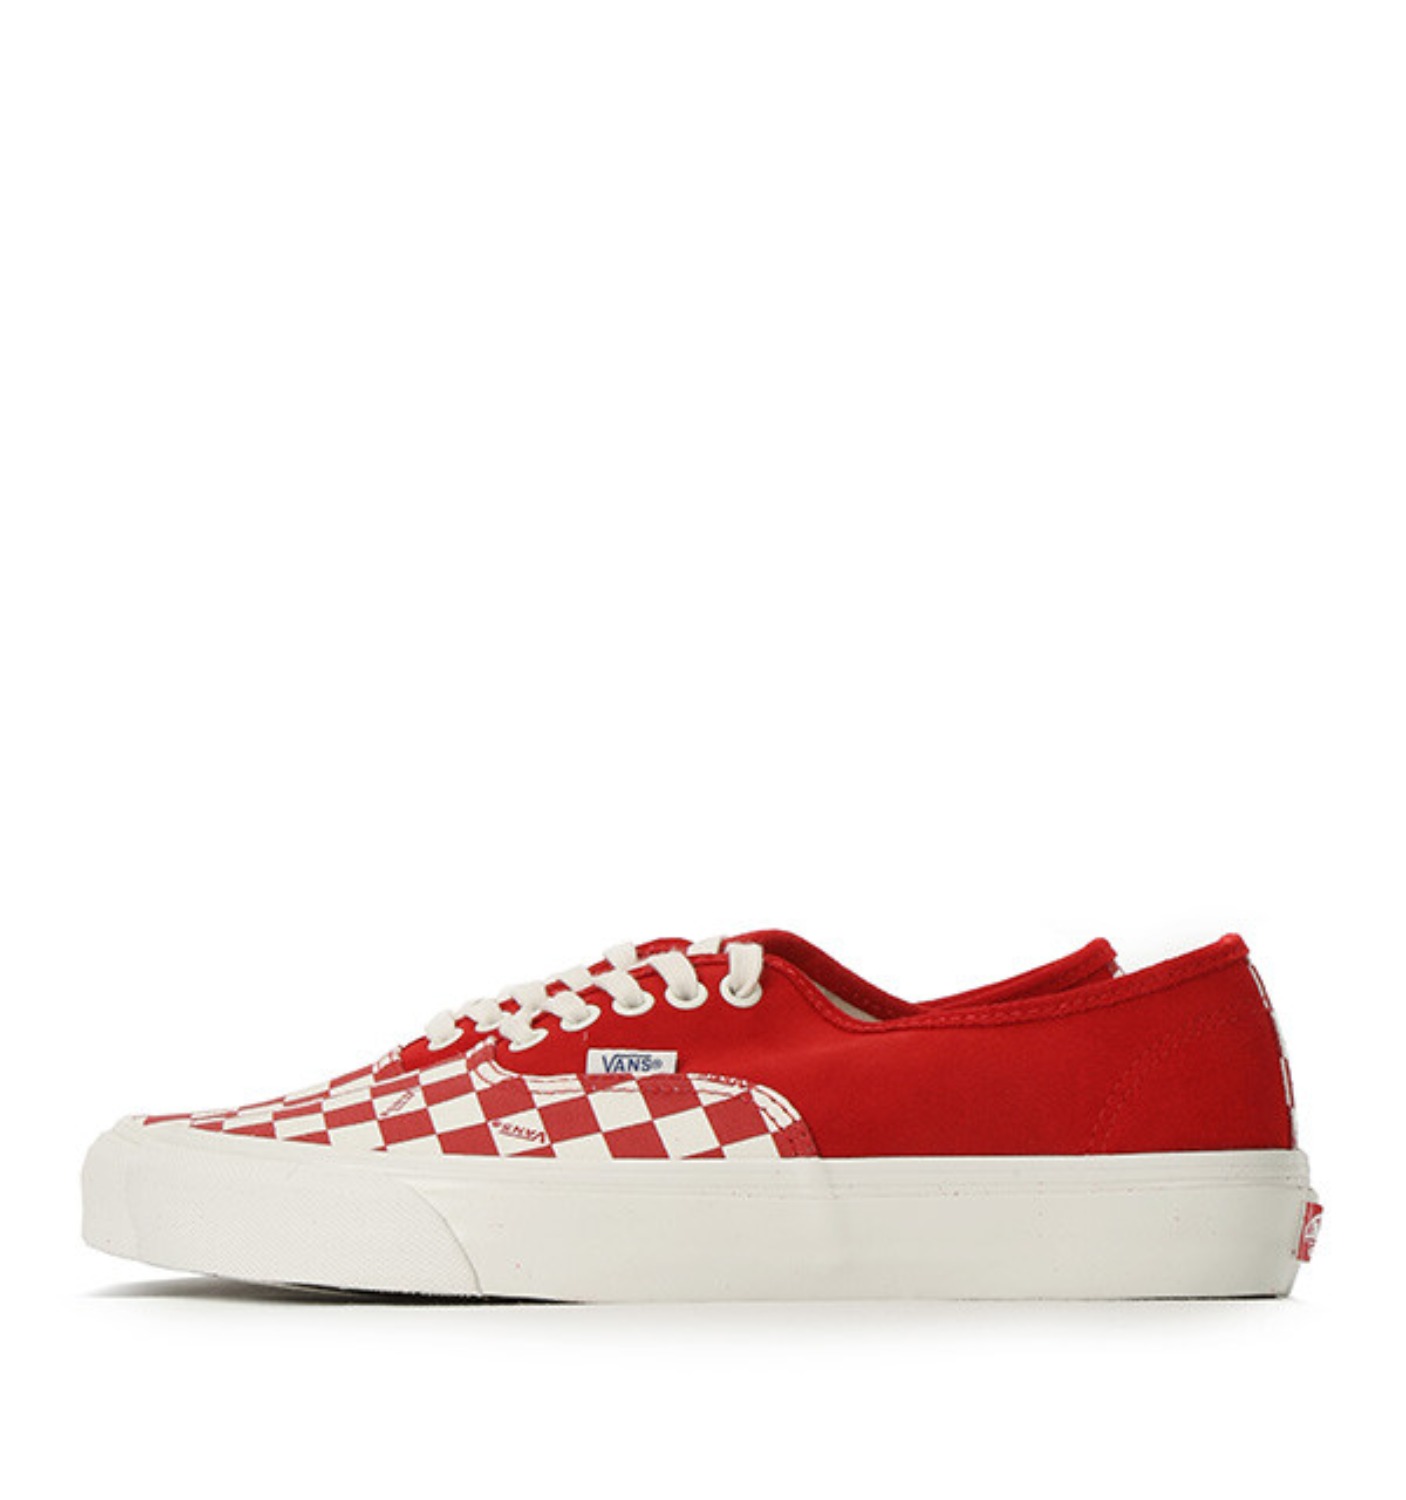 OG AUTHENTIC LX(SUEDE/CANVAS) RACING RED/CHECKERBOARD